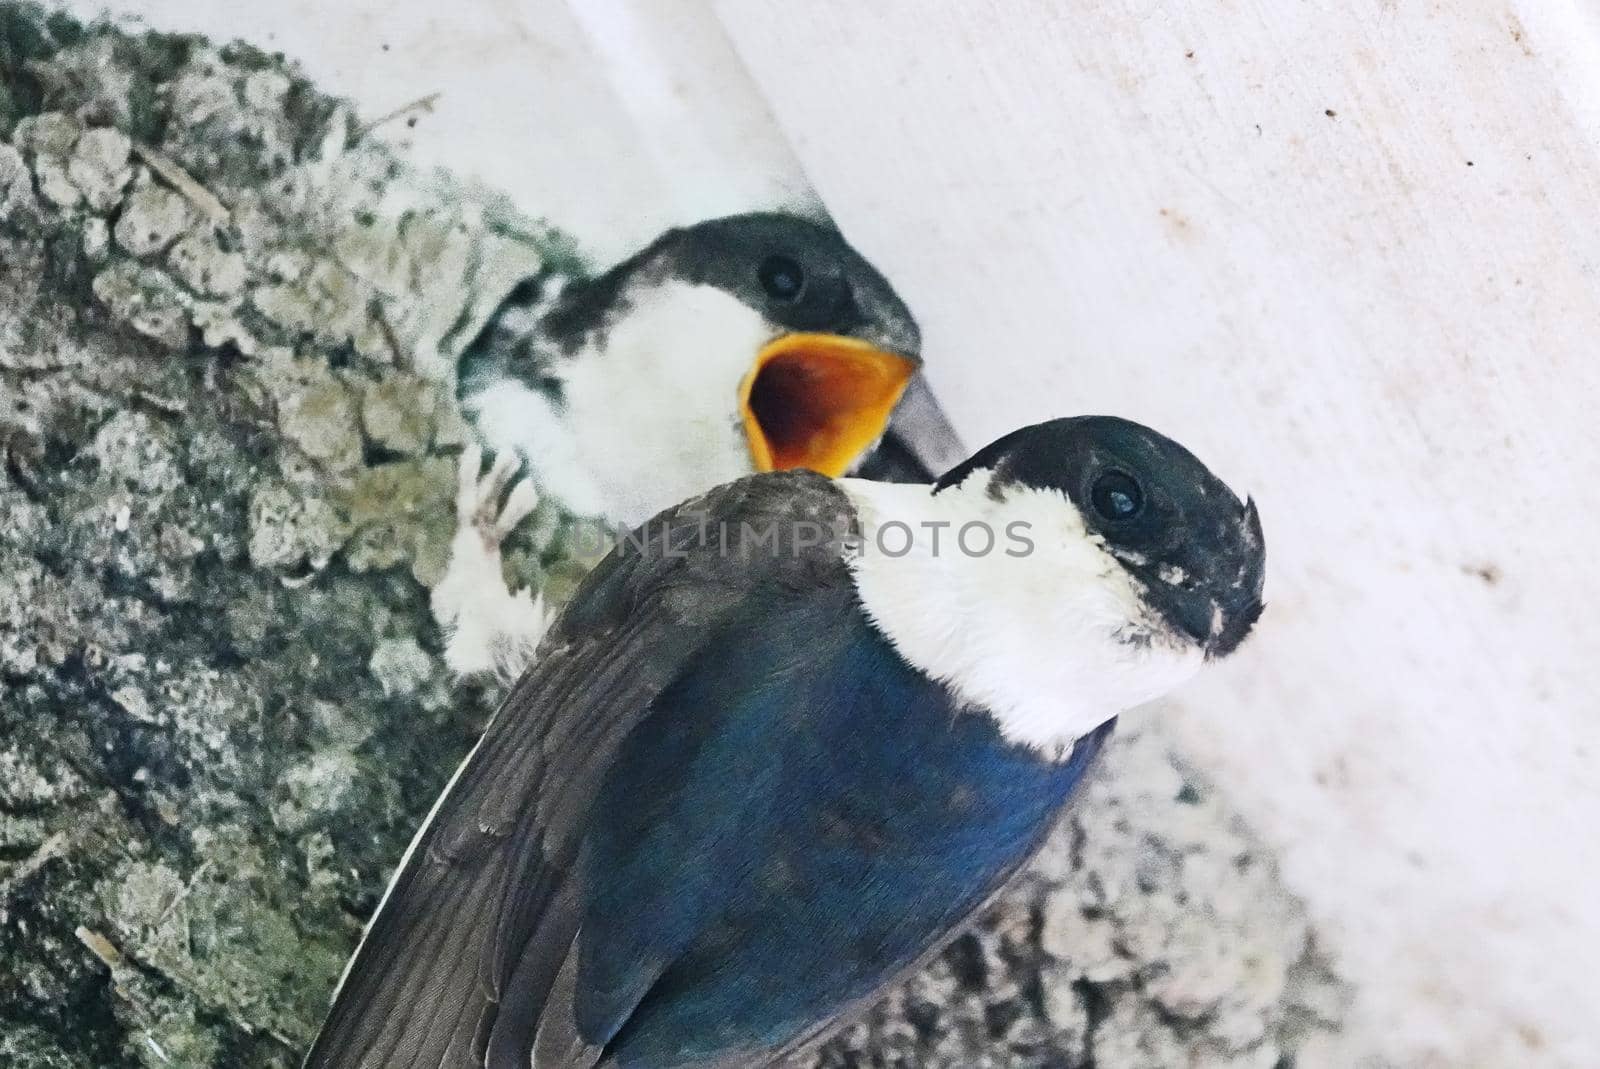 Common house martin (Delichon urbicum) bringing food to its youngsters. It hangs on its nest and looks at the photographer. The young has its beak wide open. The nests are constructed by both sexes with mud pellets collected in their beaks